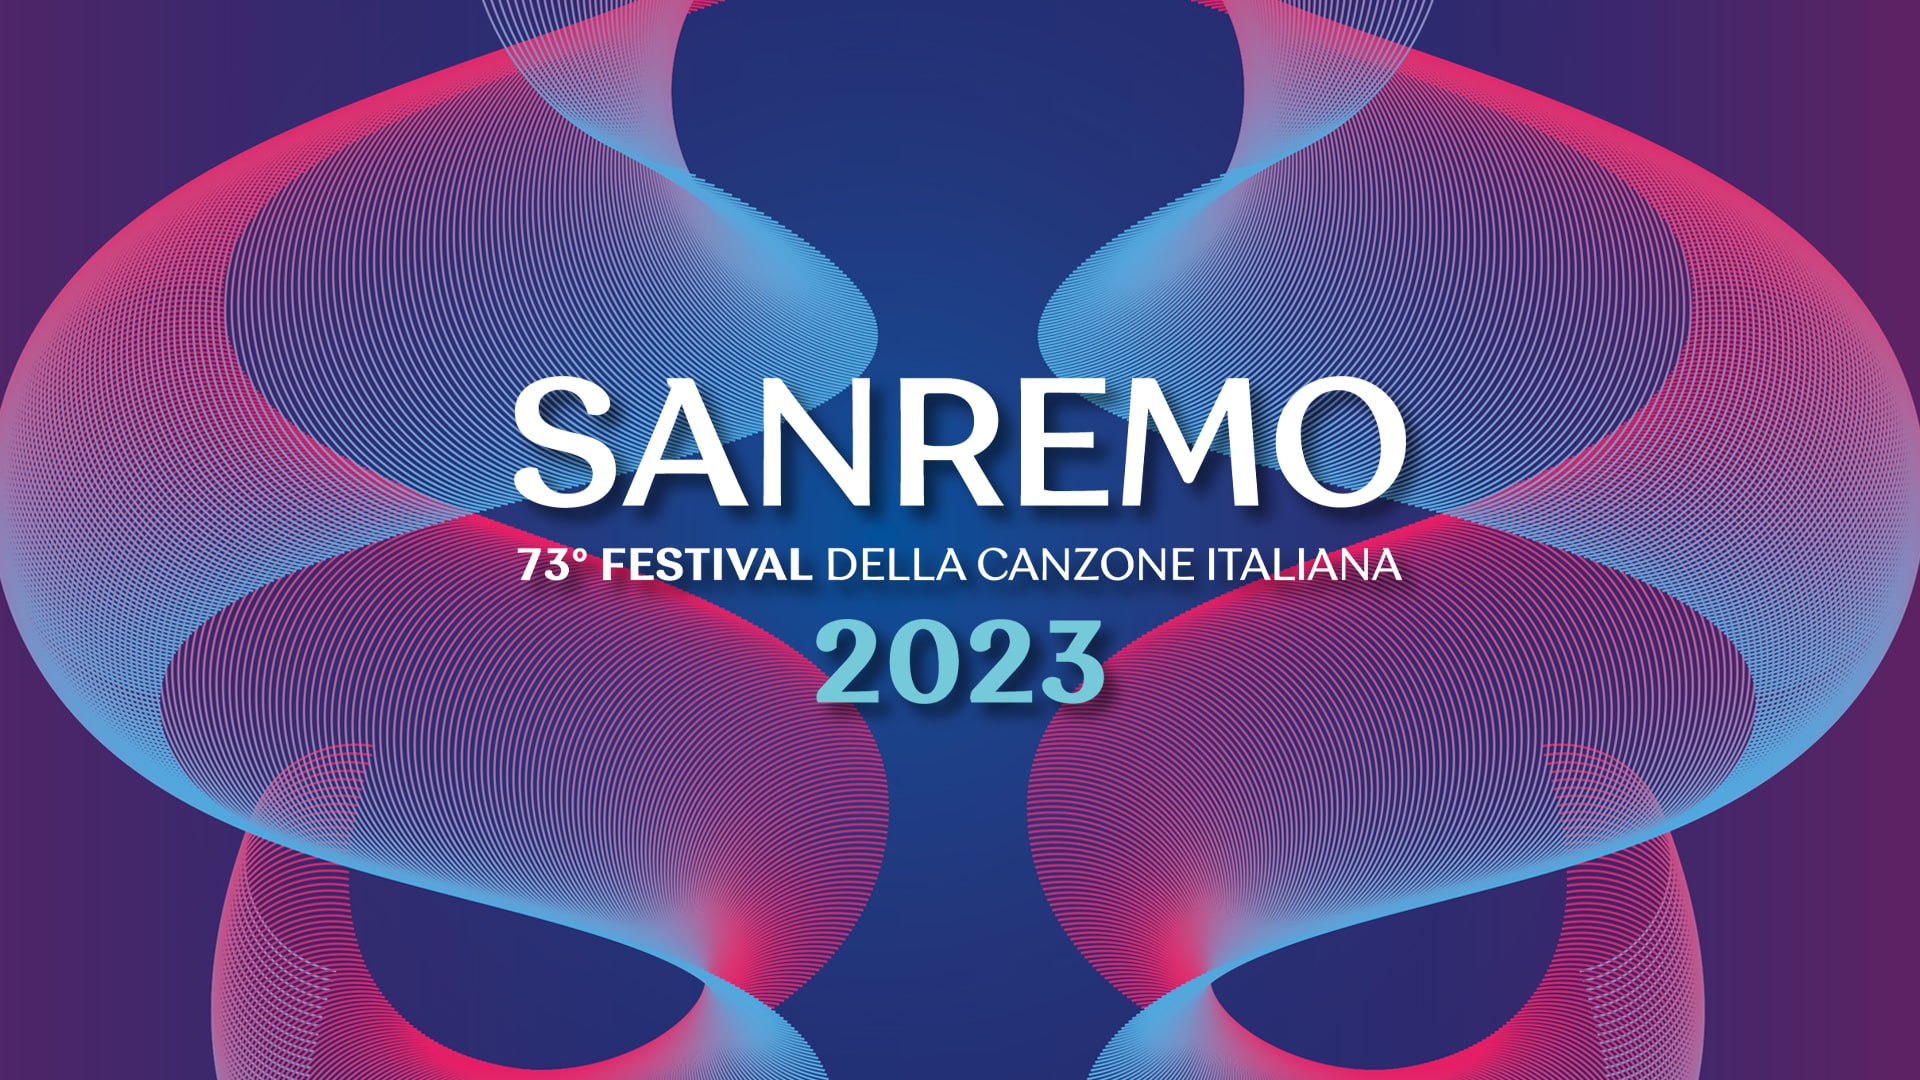 Sanremo Festival 2023 A Guide to Italy's Iconic Music Event